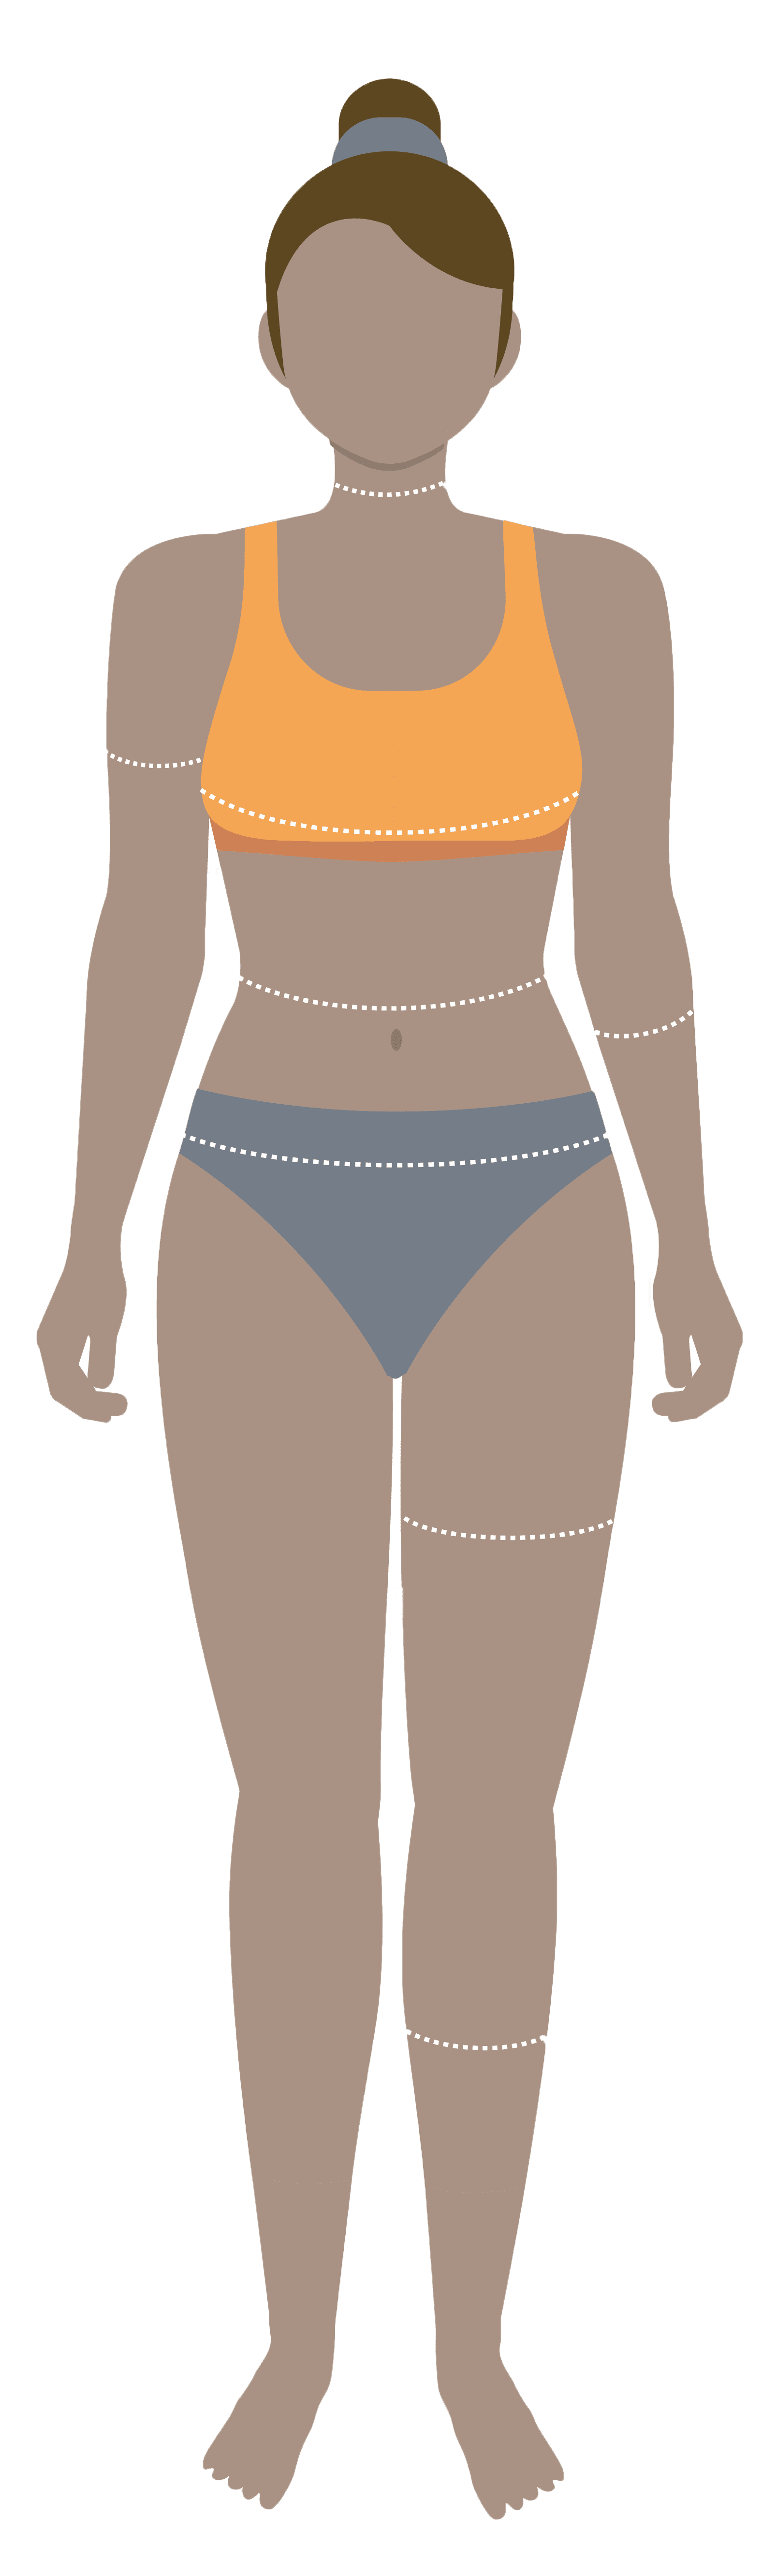 drawing of a woman wearing athletic bra and bathing suit bottoms for body scan